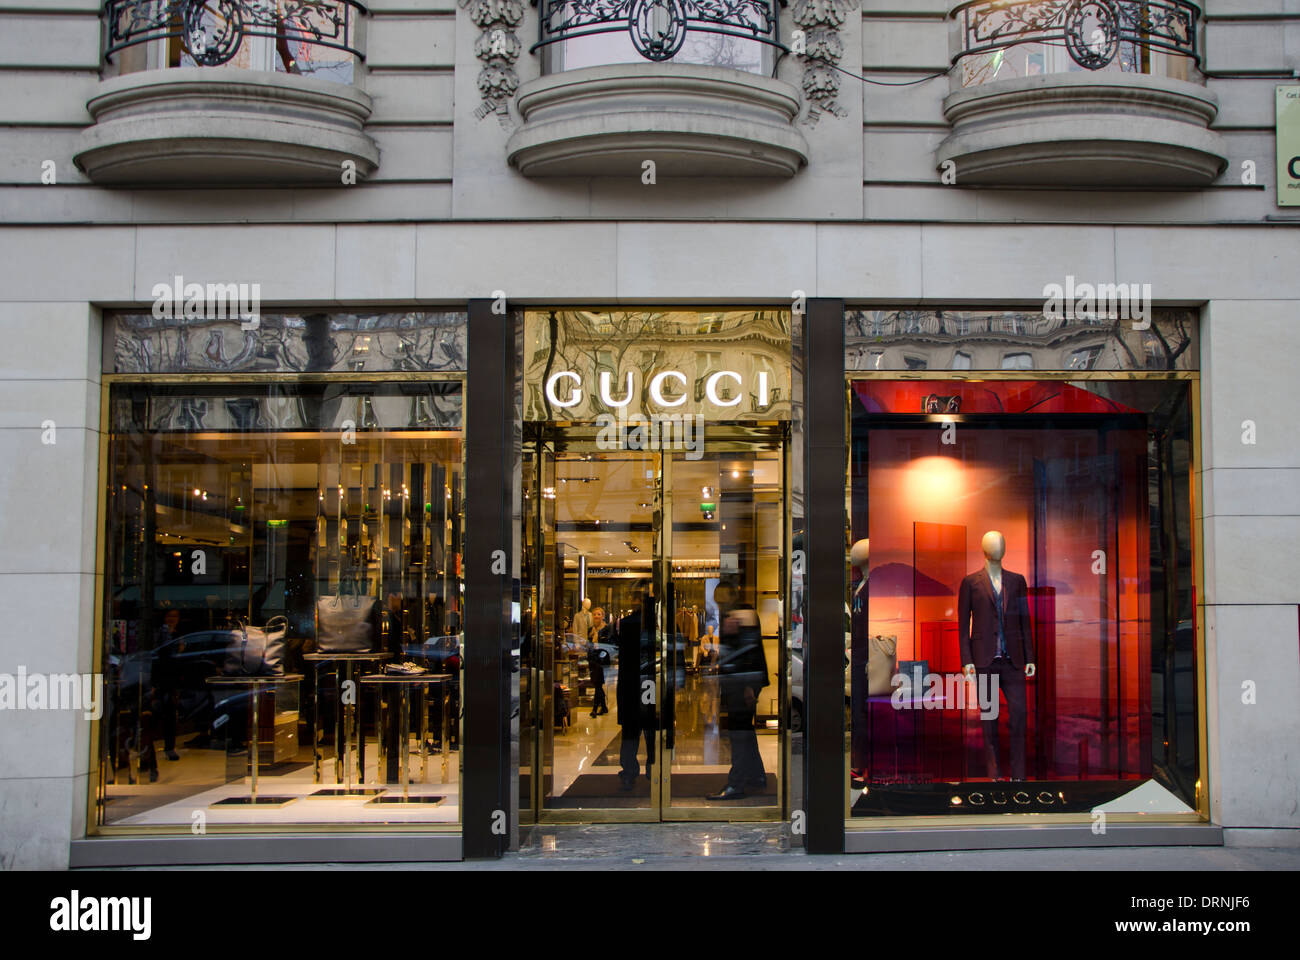 Facade of a Italian fashion Gucci store, shop, in Paris France Stock Photo, Royalty Free Image ...